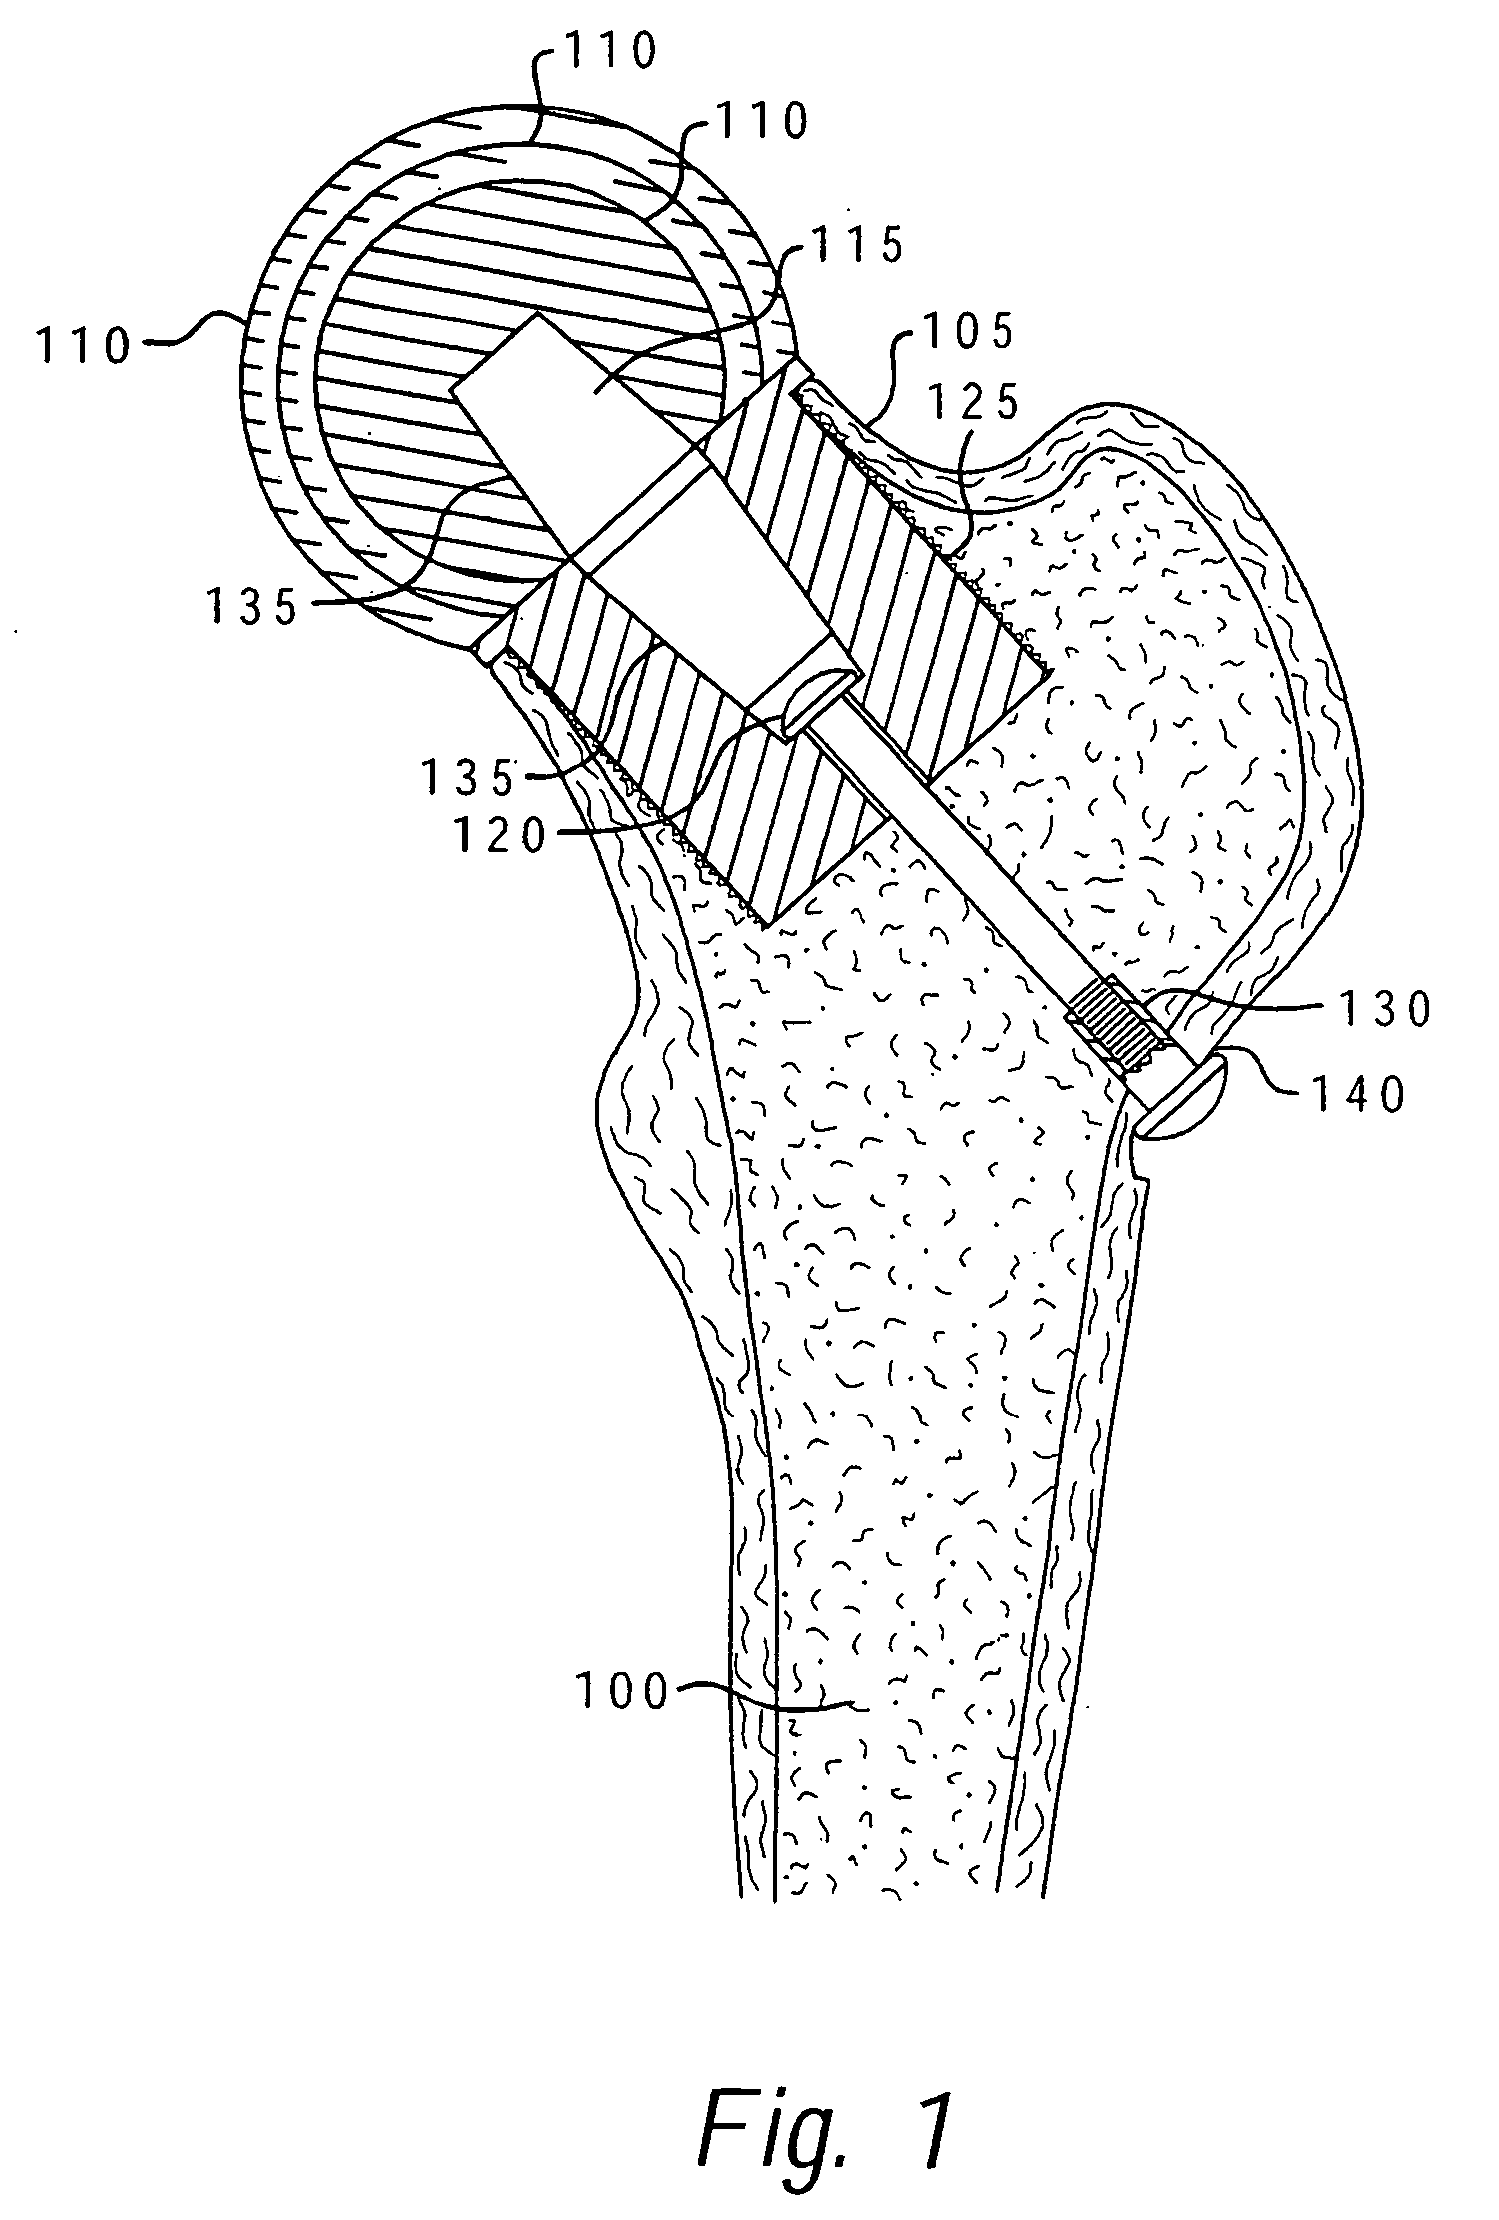 Method of resecting a femoral head for implantation of a femoral neck fixation prosthesis